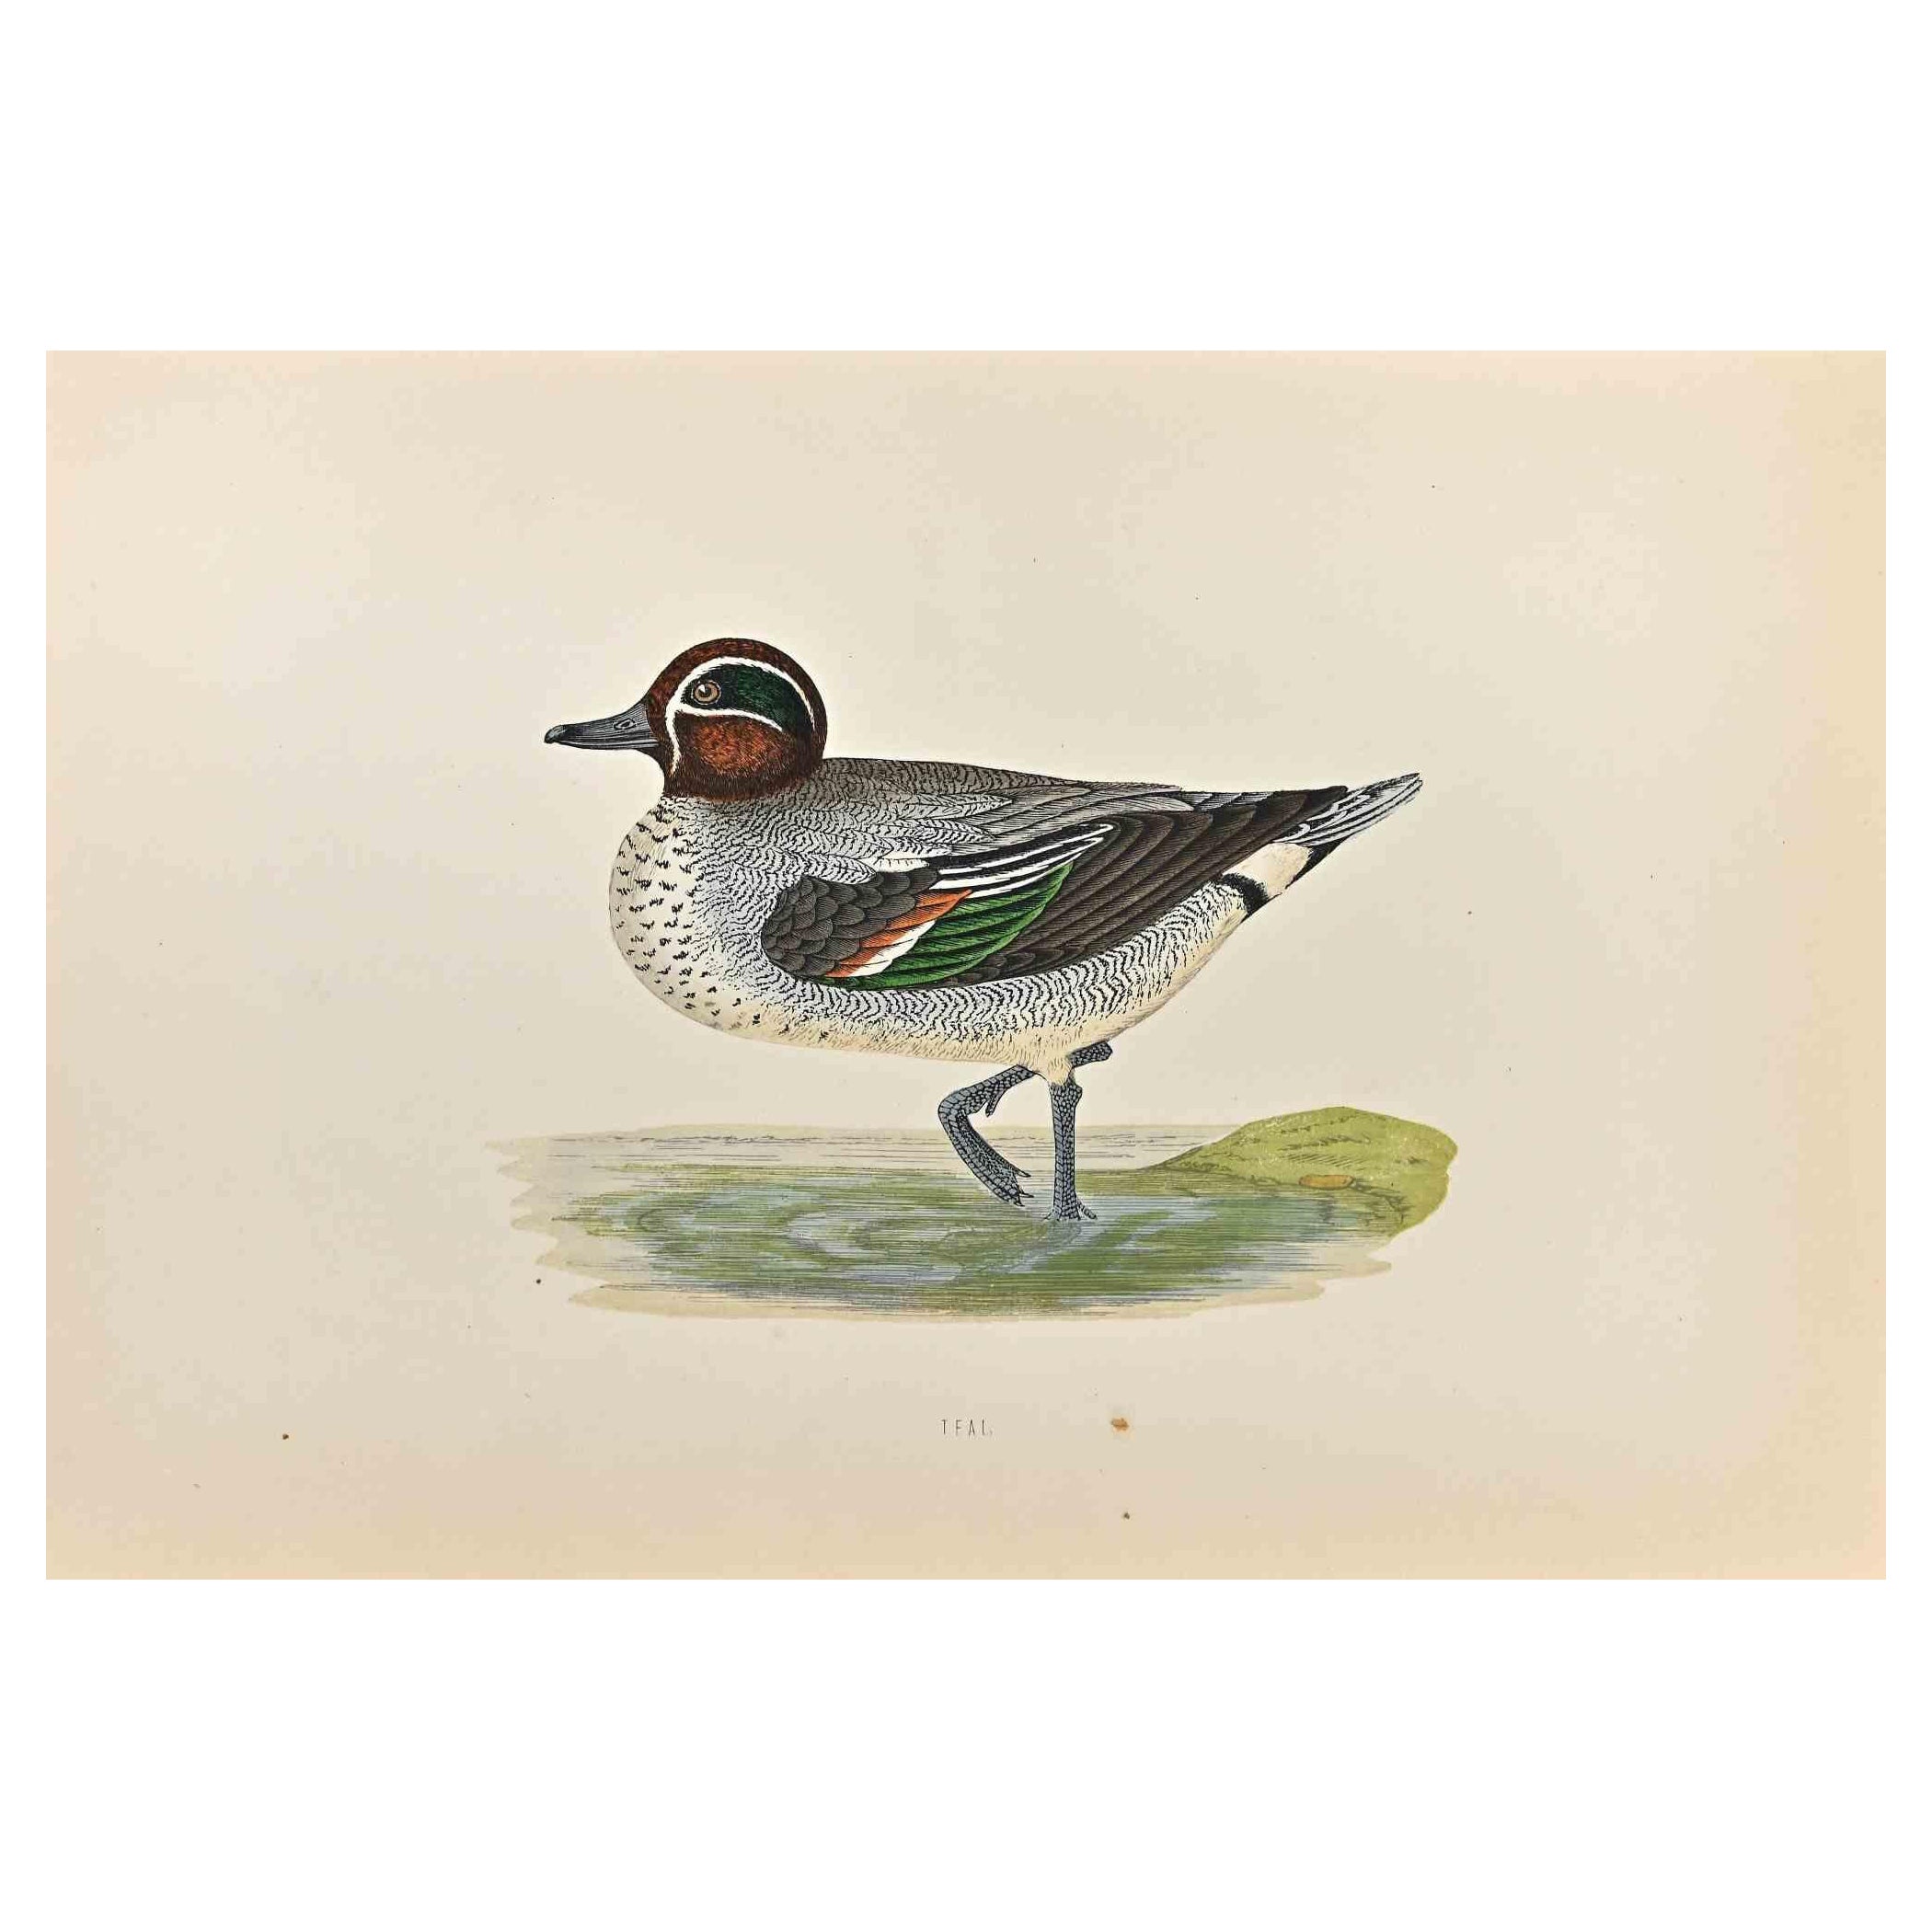 Teal is a modern artwork realized in 1870 by the British artist Alexander Francis Lydon (1836-1917).

Woodcut print on ivory-colored paper.

Hand-colored, published by London, Bell & Sons, 1870.  

The name of the bird is printed on the plate. This